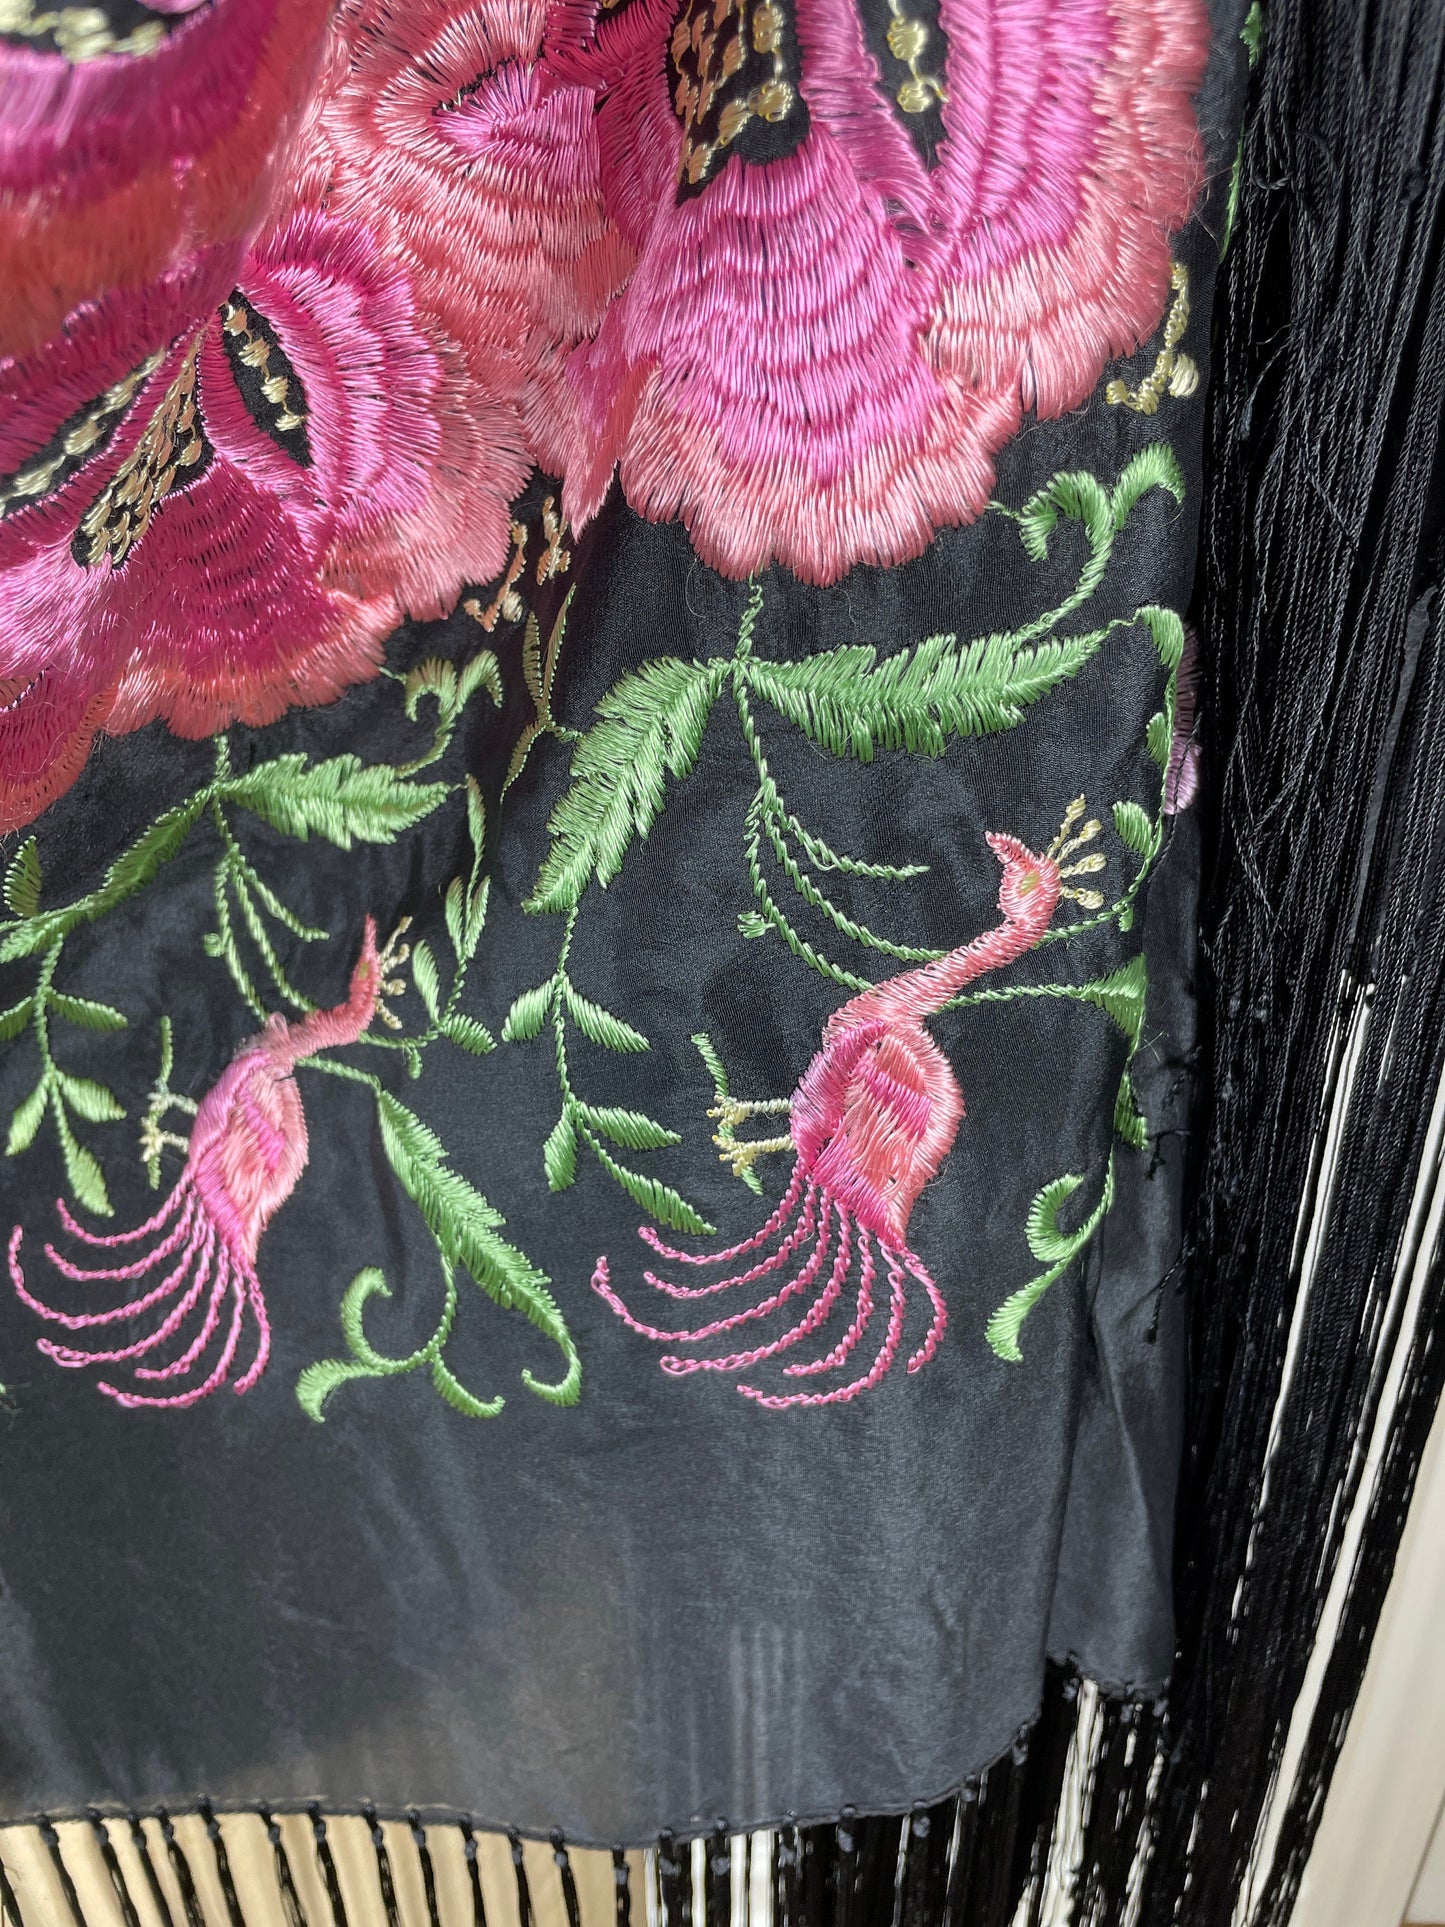 1920s 30s silk piano shawl in black and pink with long fringe 51" x 52"